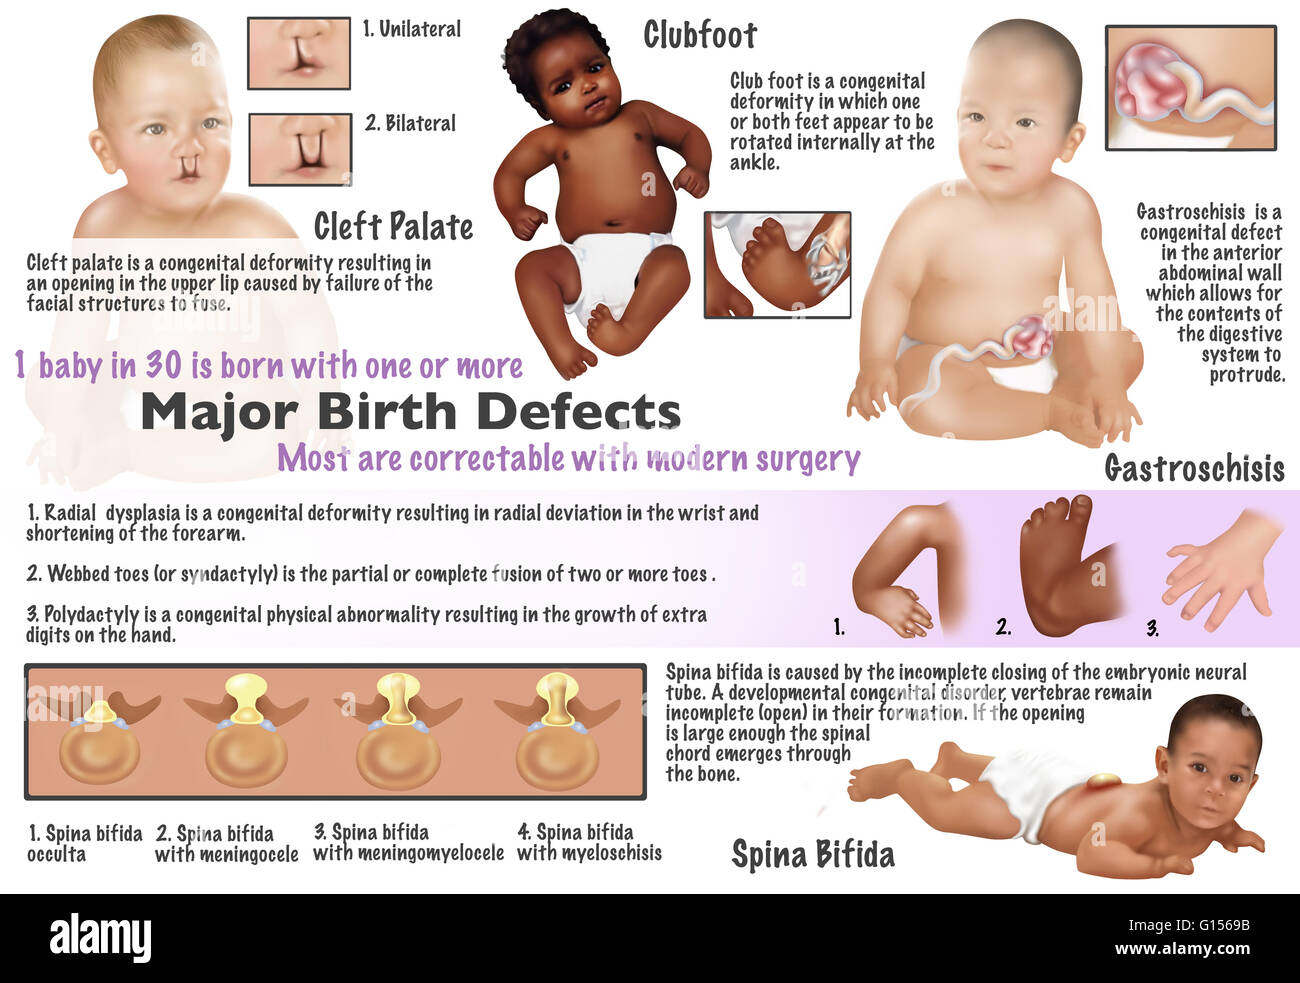 Illustration of birth defects found in babies. Cleft palate, clubfoot, radial dysplasia, webbed toes, polydactyl, gastroschisis, and spina bifida. 1 baby in 30 is born with one or more major birth defects. Most are correctable with modern surgery. Stock Photo